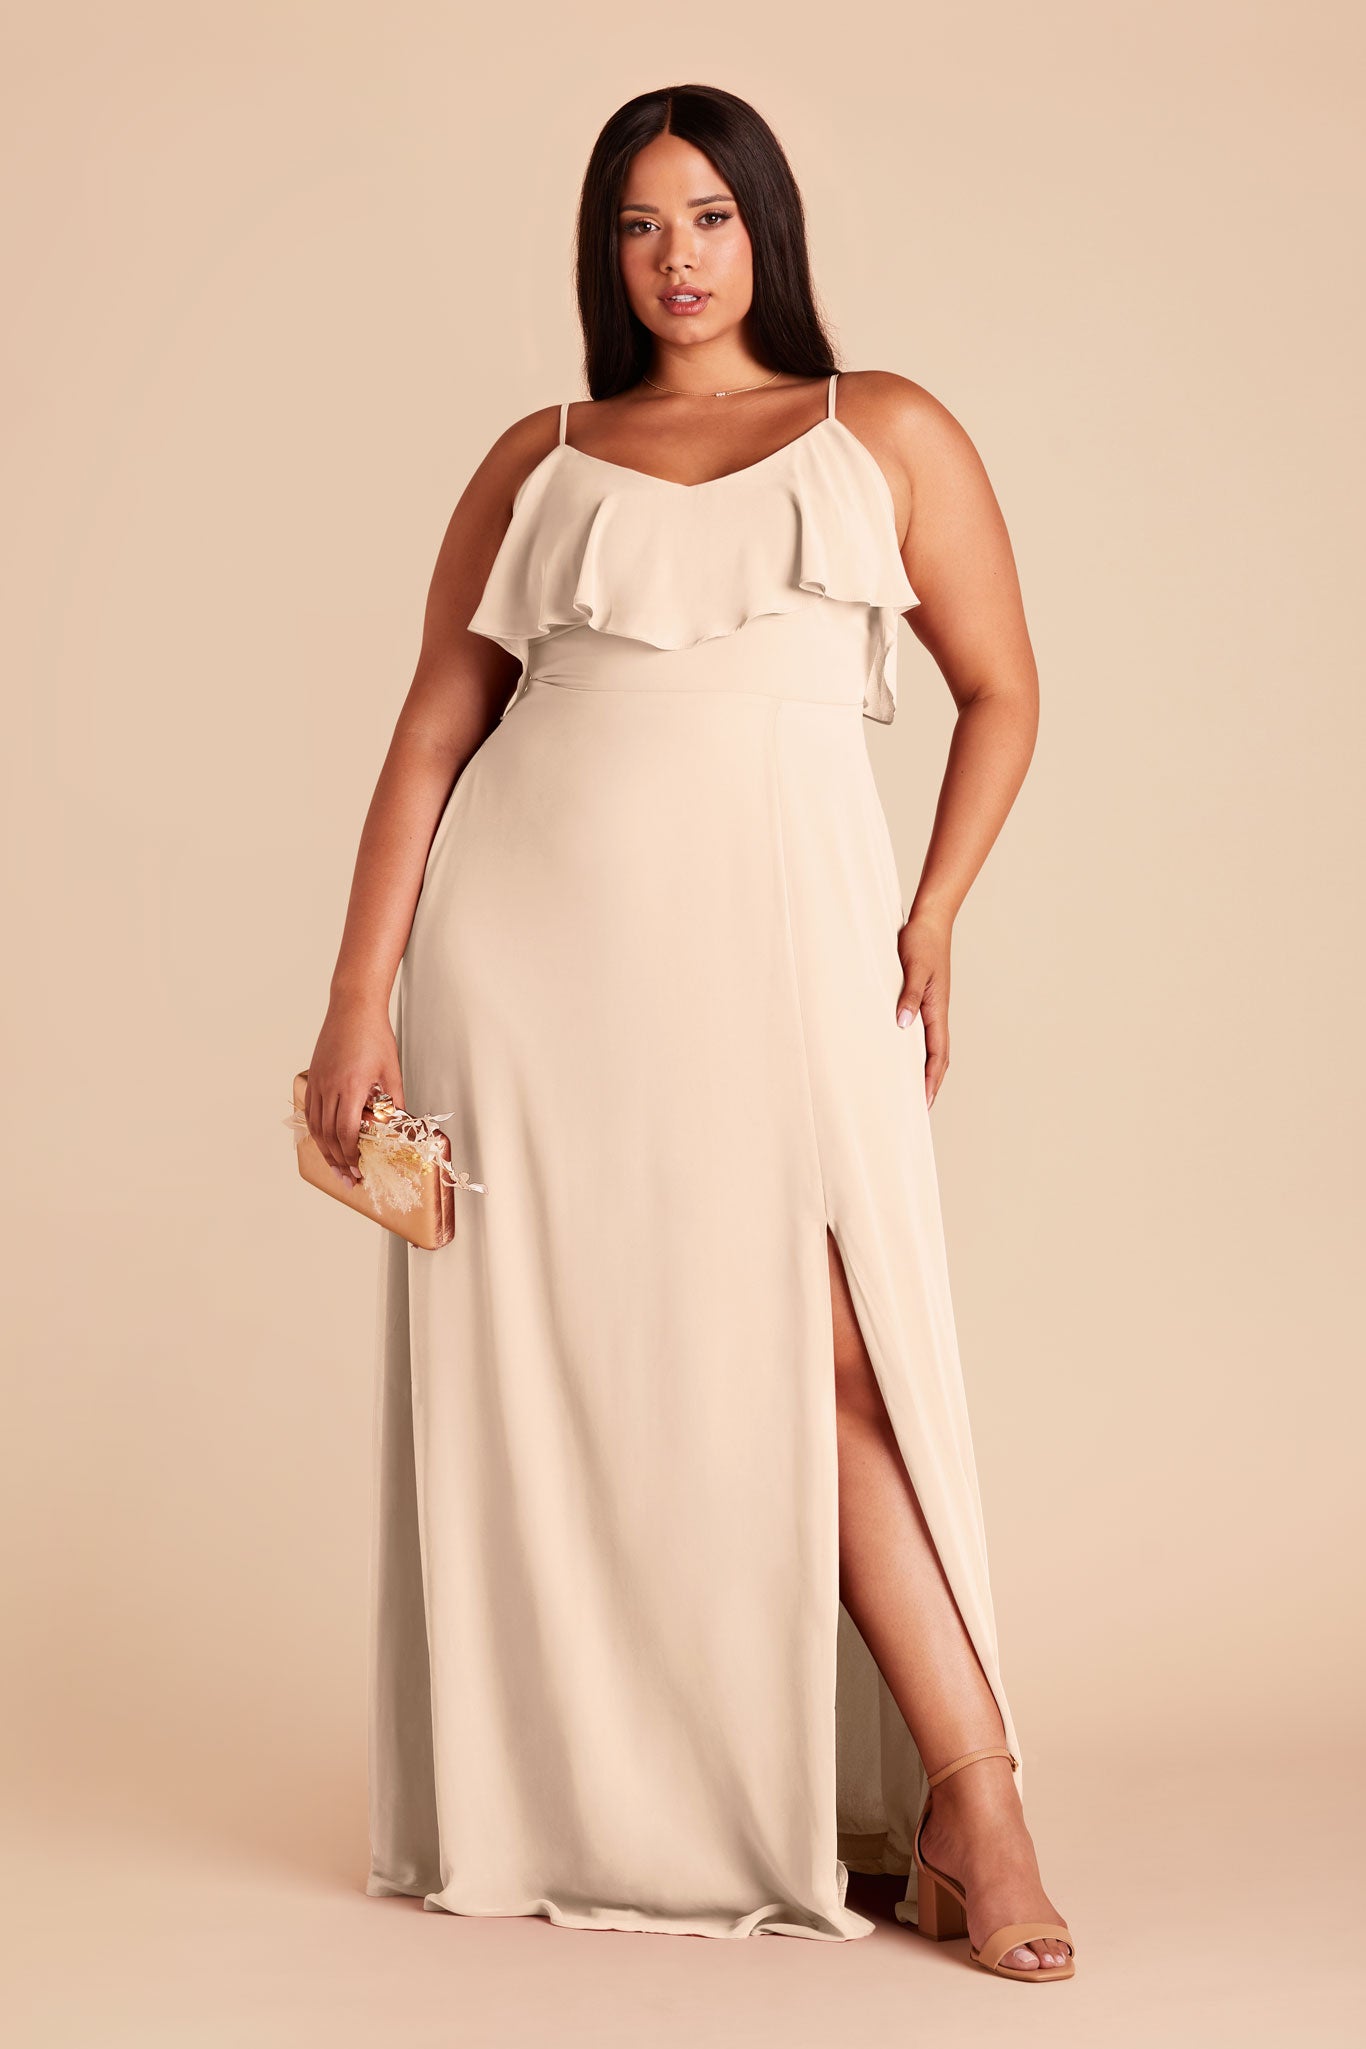 Champagne Jane Convertible Dress by Birdy Grey